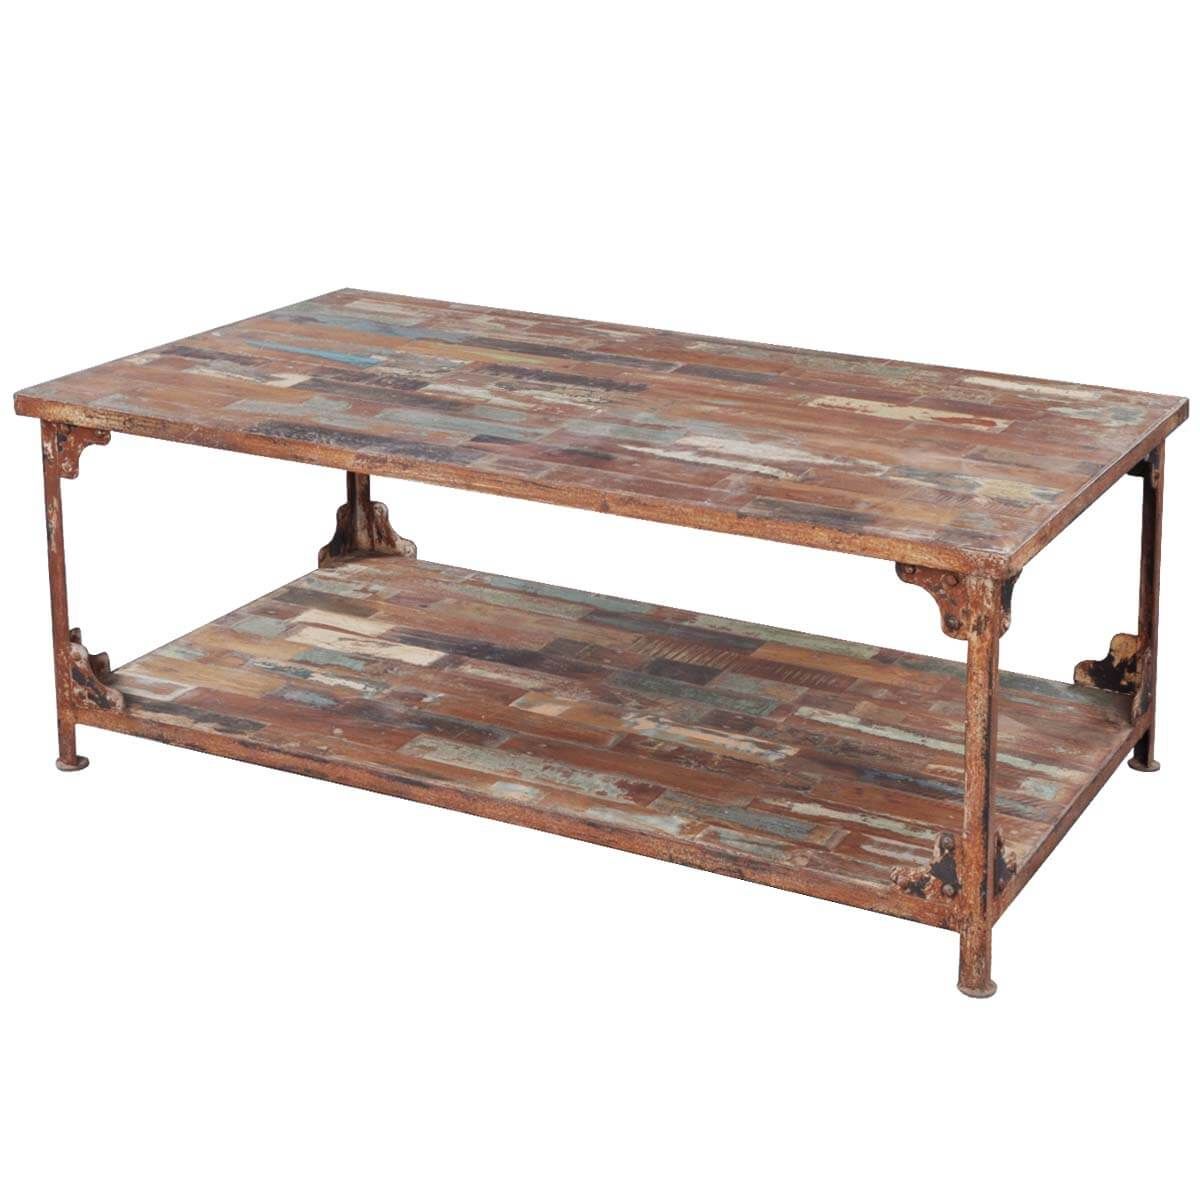 Distressed Reclaimed Wood Wrought Iron Industrial Rustic Coffee Table Inside Distressed Iron 4 Shelf Desks (View 6 of 15)